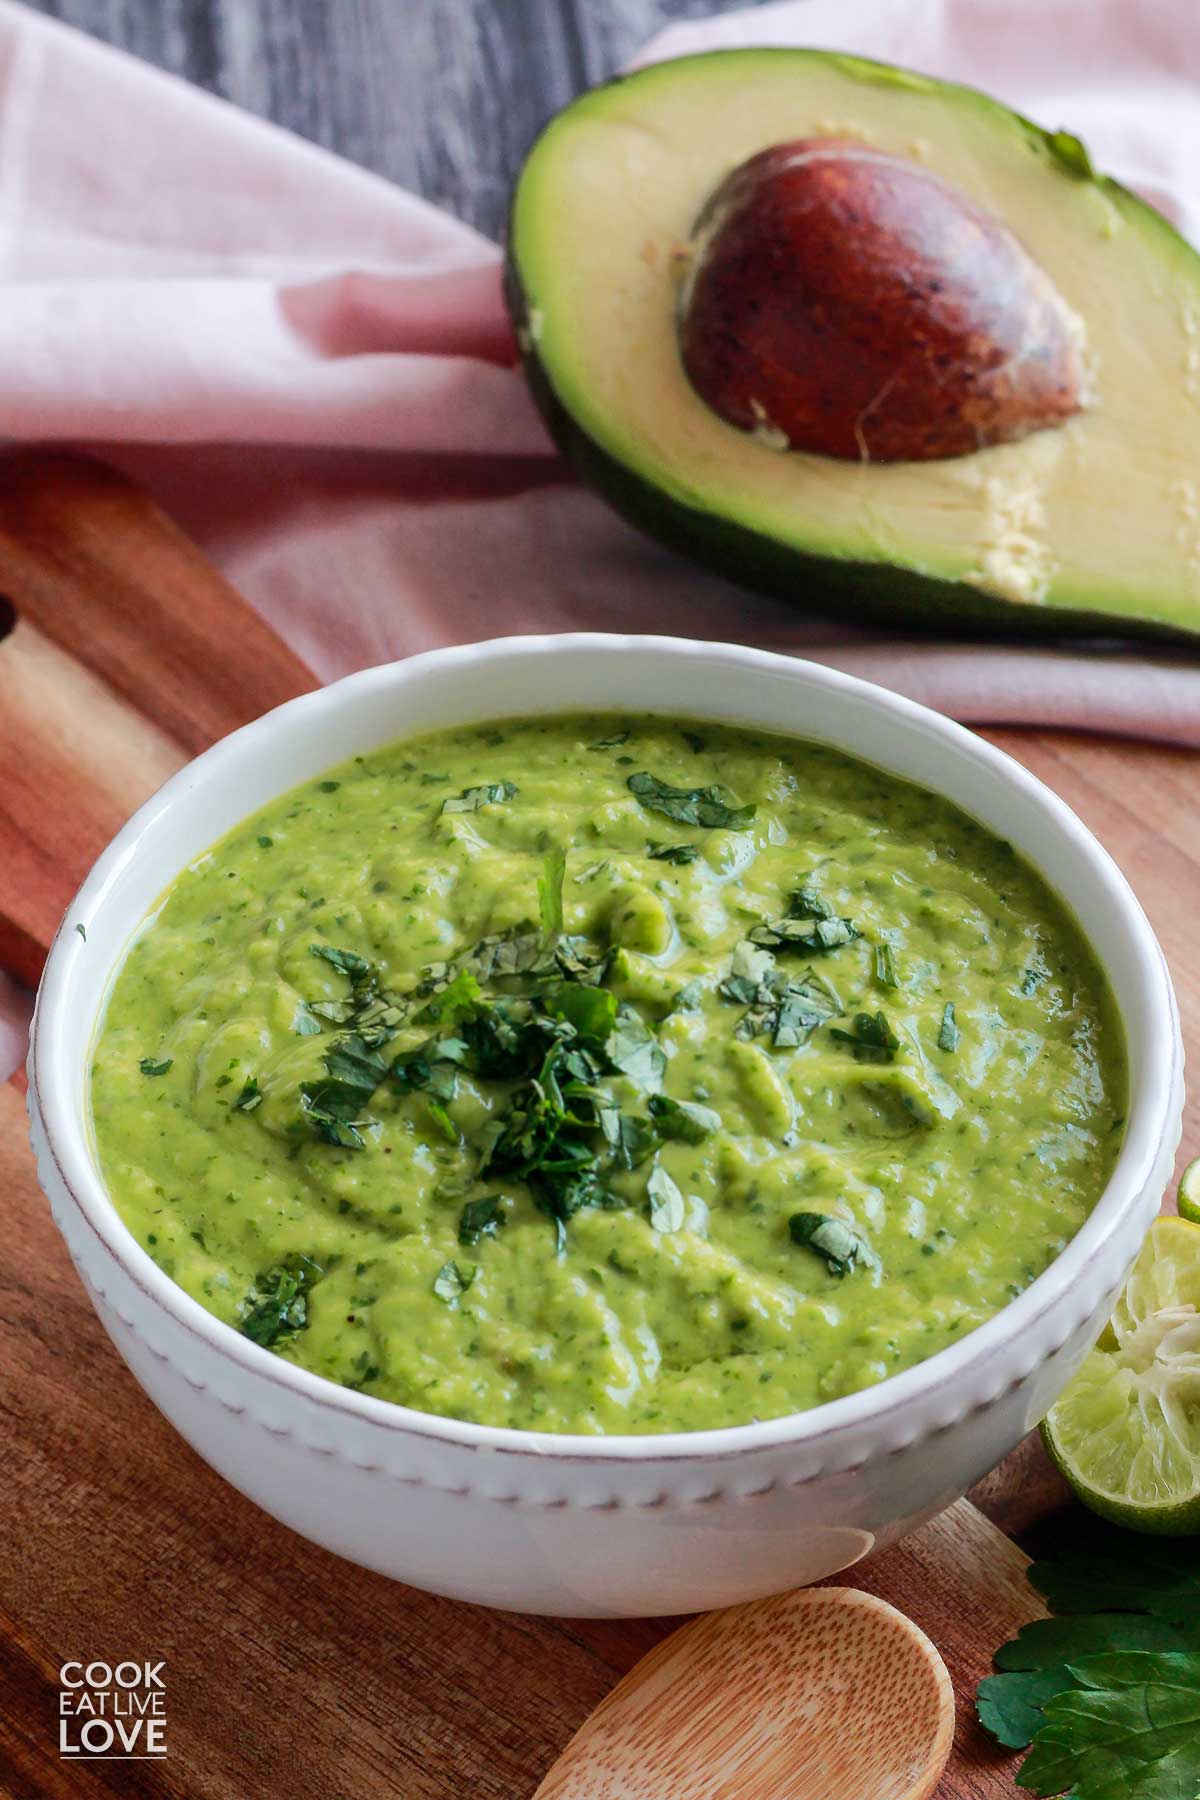 Bowl of green sauce on the table with a spoon.